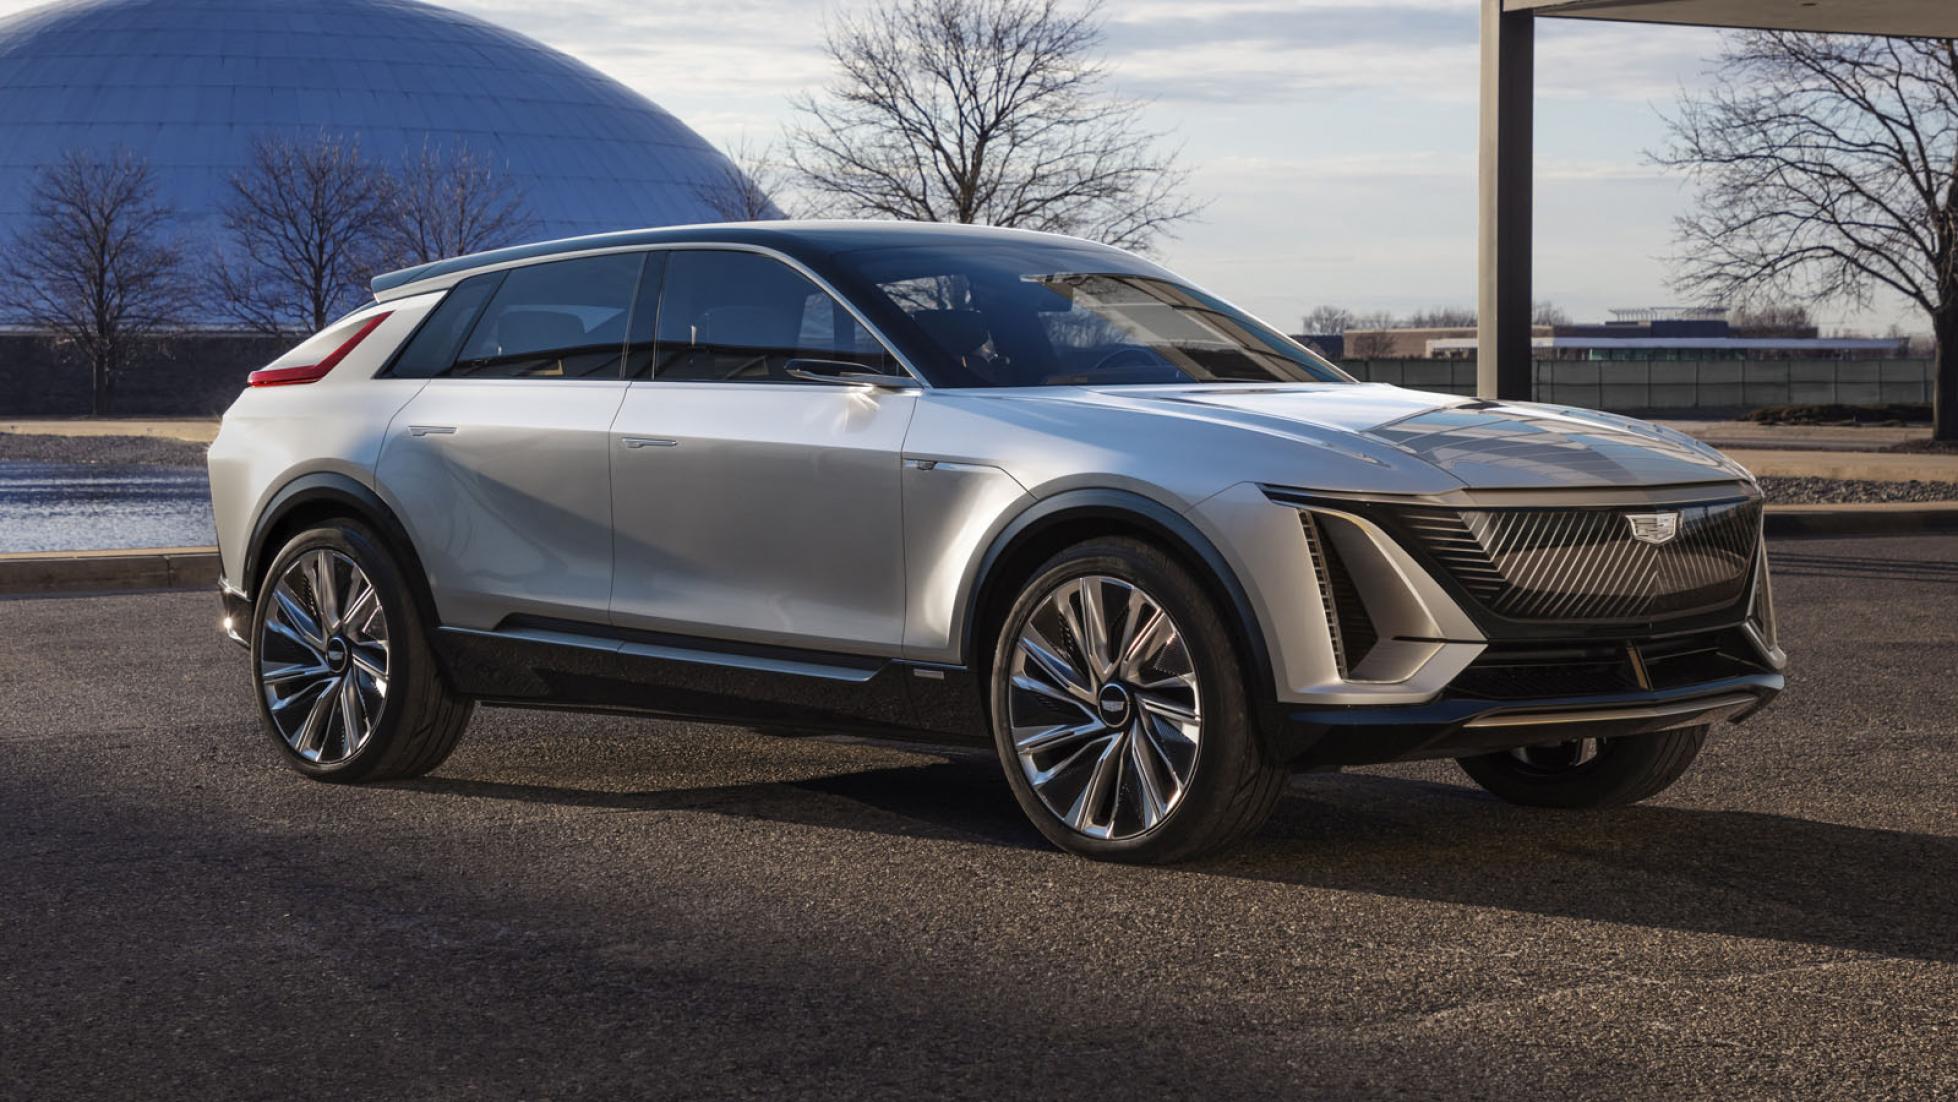 TopGear The Lyriq is a luxury, allelectric Cadillac SUV